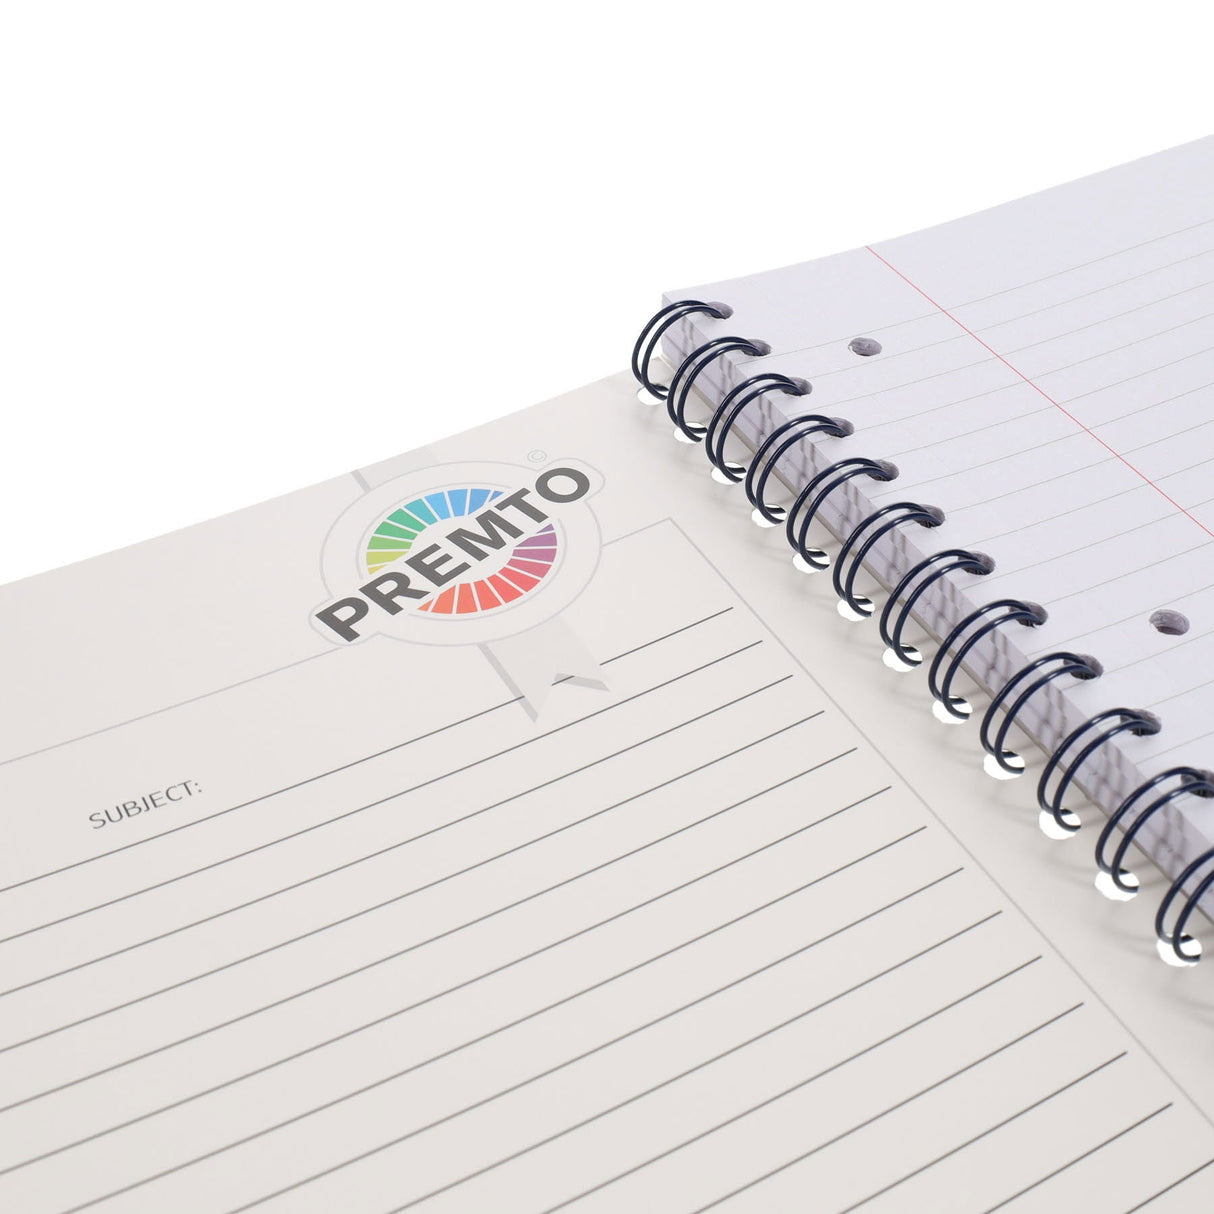 Premto A4 Wiro Notebook - 200 Pages - Caterpillar Green-A4 Notebooks- Buy Online at Stationery Shop UK